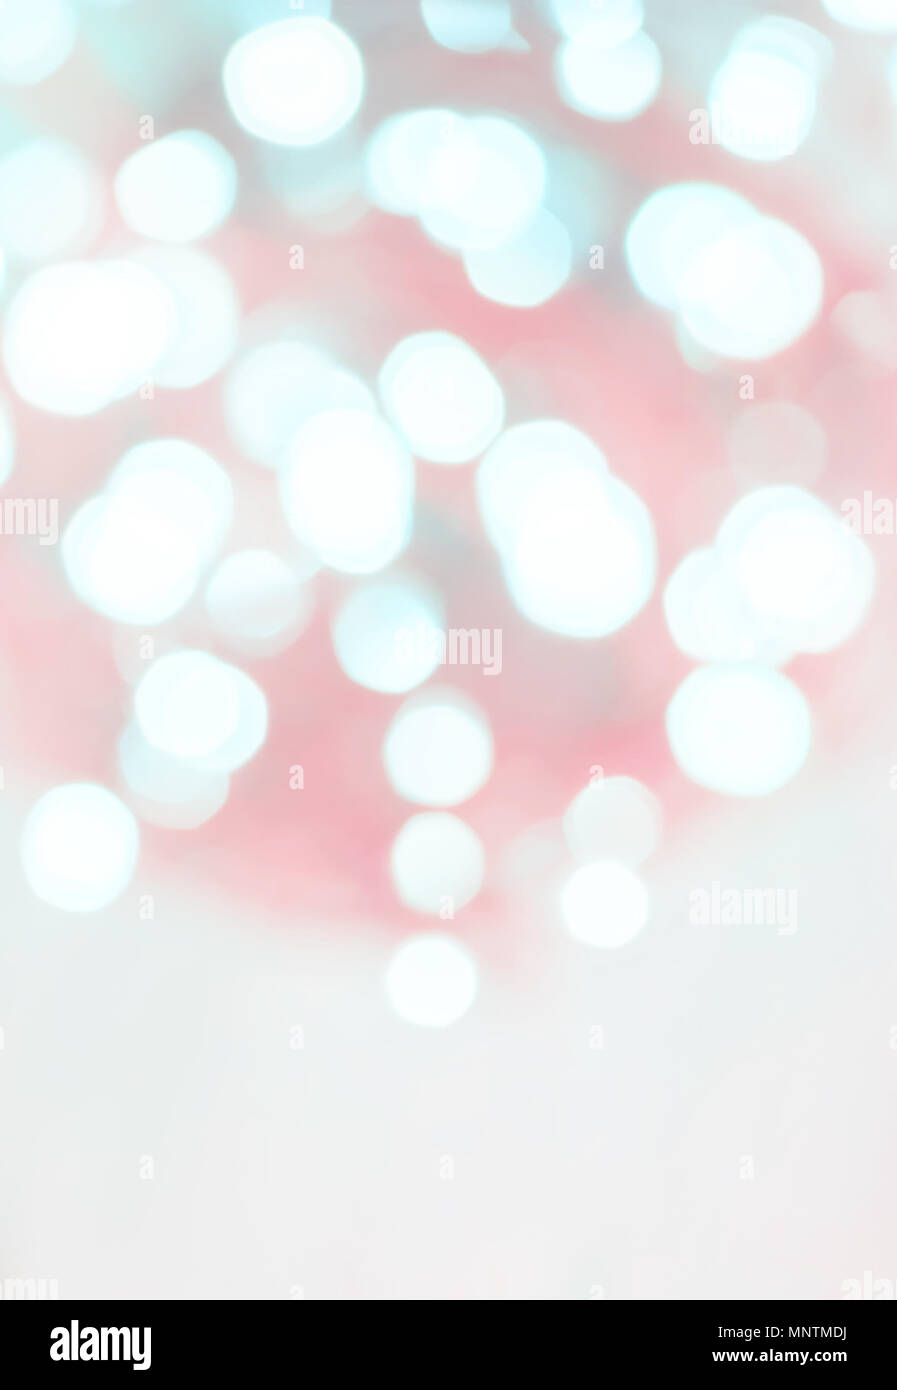 Winter lights in vertical red and creamy white for abstract background with copy space. Stock Photo